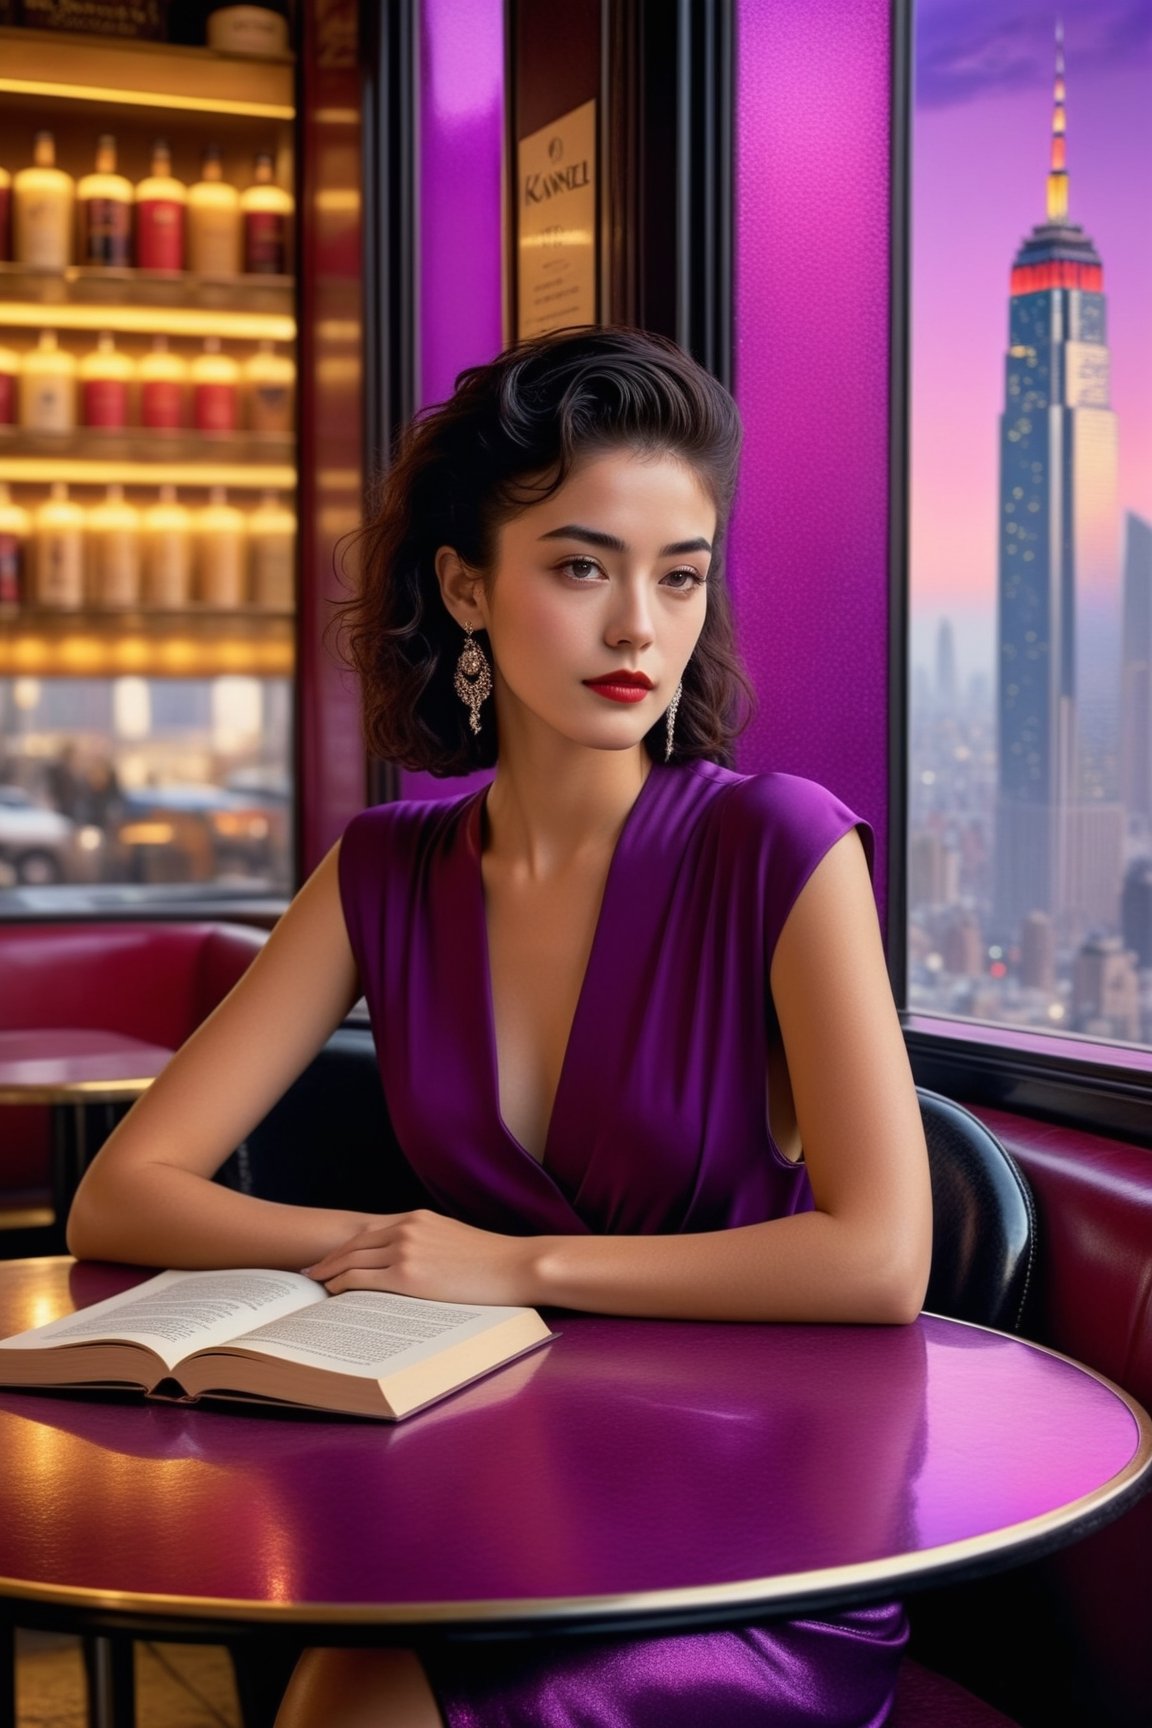 Hyper-Realistic photo of a girl sitting in a cafe at night,20yo,1girl,solo,Sean Young \(in Blade Runner\),detailed exquisite face,detailed soft shiny skin,lips,smile,perfect female form,looking at viewer,disheveled long black hair blowing,[Deep Purple and Wine Red color],elegant dress,chanel,prada,close up
BREAK
backdrop of beautiful city skyscrapers,table,coffee mug,vase,book,cluttered maximalism
BREAK
(rule of thirds:1.3),perfect composition,studio photo,trending on artstation,depth of perspective,(Masterpiece,Best quality,32k,UHD:1.4),(sharp focus,high contrast,HDR,hyper-detailed,intricate details,ultra-realistic,award-winning photo,ultra-clear,kodachrome 800:1.3),(chiaroscuro lighting:1.3),by Antonio Lopez, Diego Koi, Karol Bak and Hayao Miyazaki,photo_b00ster, real_booster,art_booster